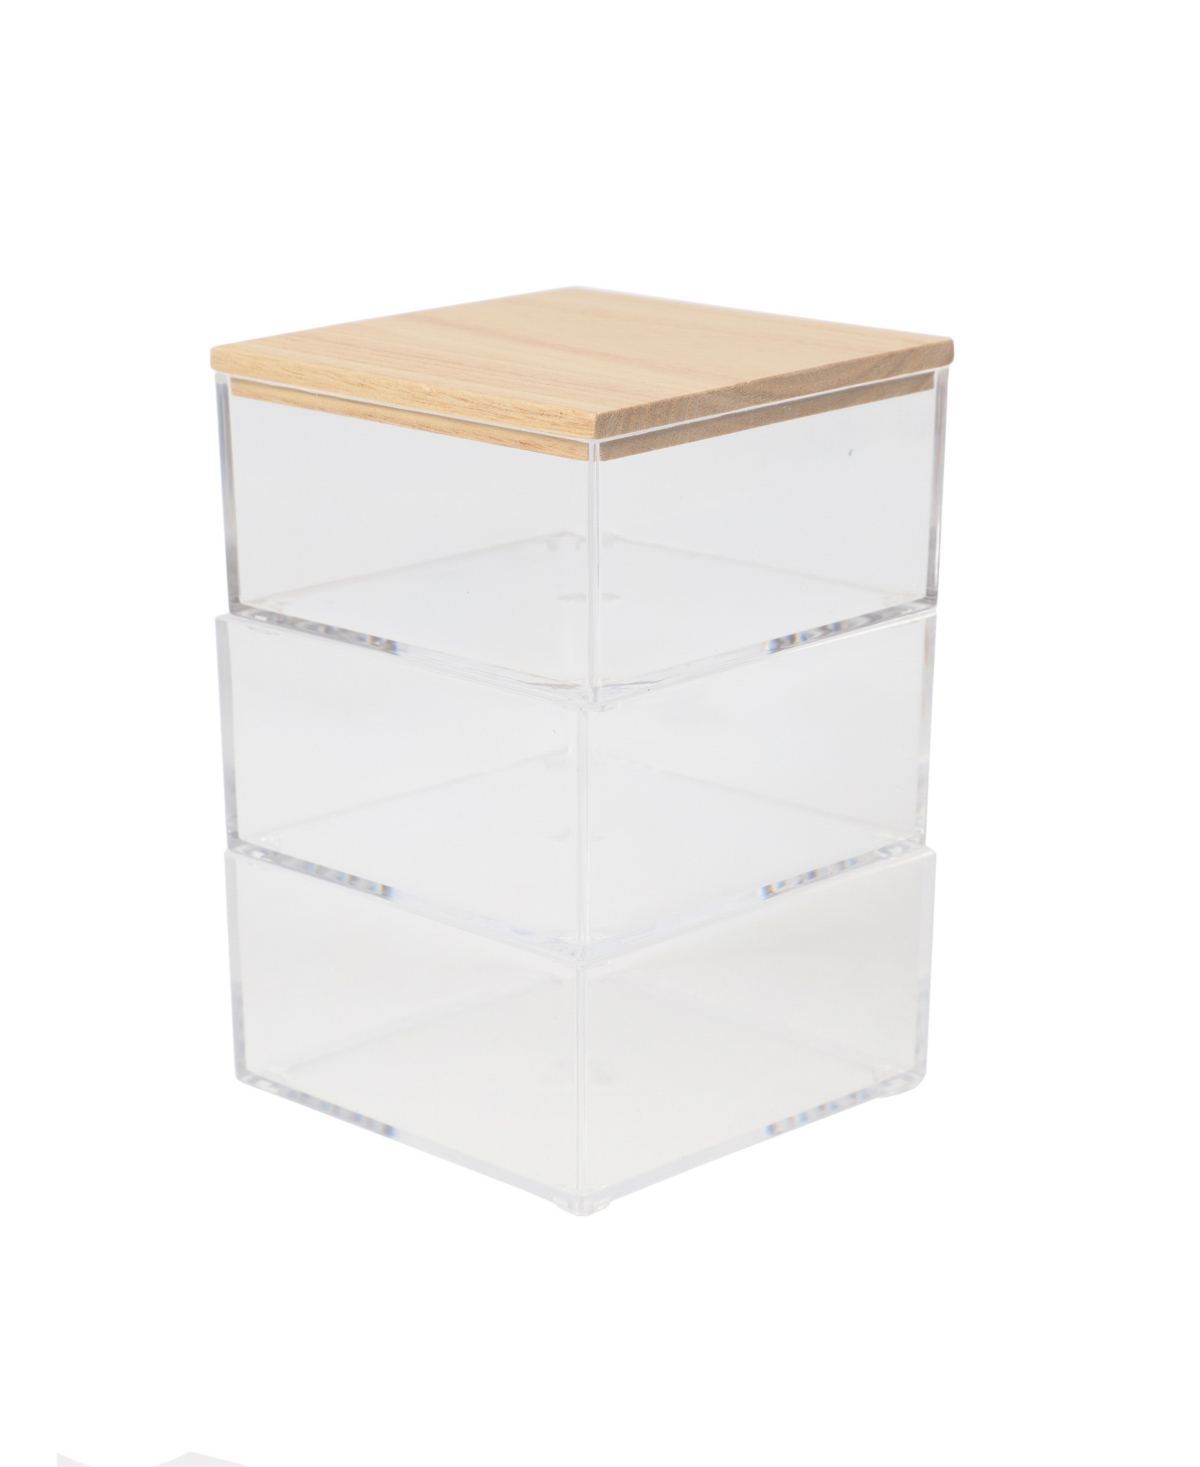 Brody Plastic Storage Organizer Bins with Paulownia Wood Lid for Home Office or Kitchen, 3 Pack Small, 3.75" x 3" - Clear, Light Natura